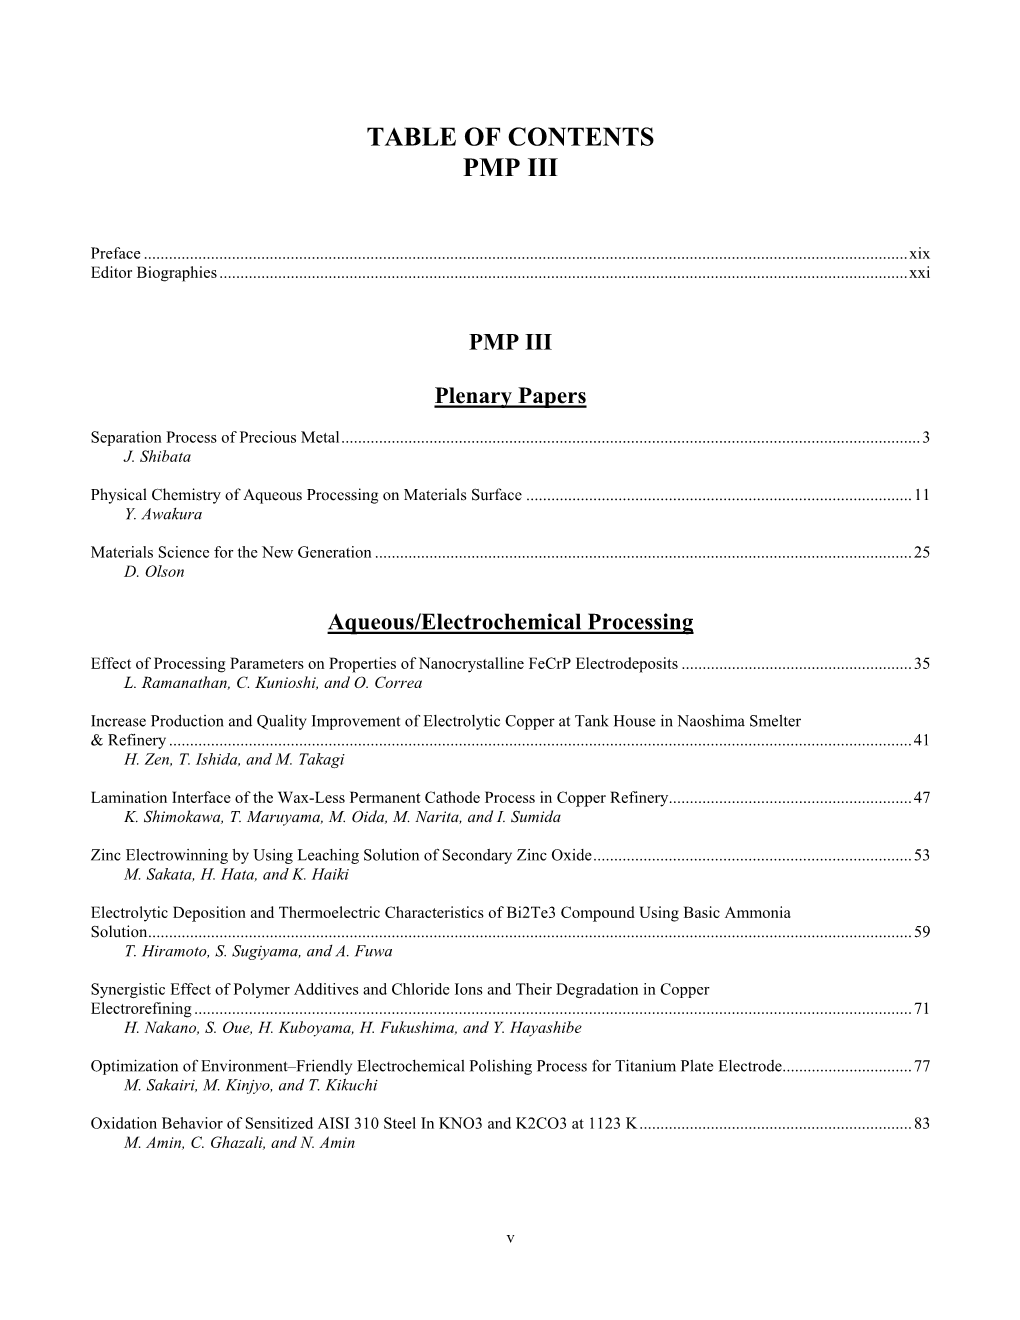 Table of Contents Pmp Iii